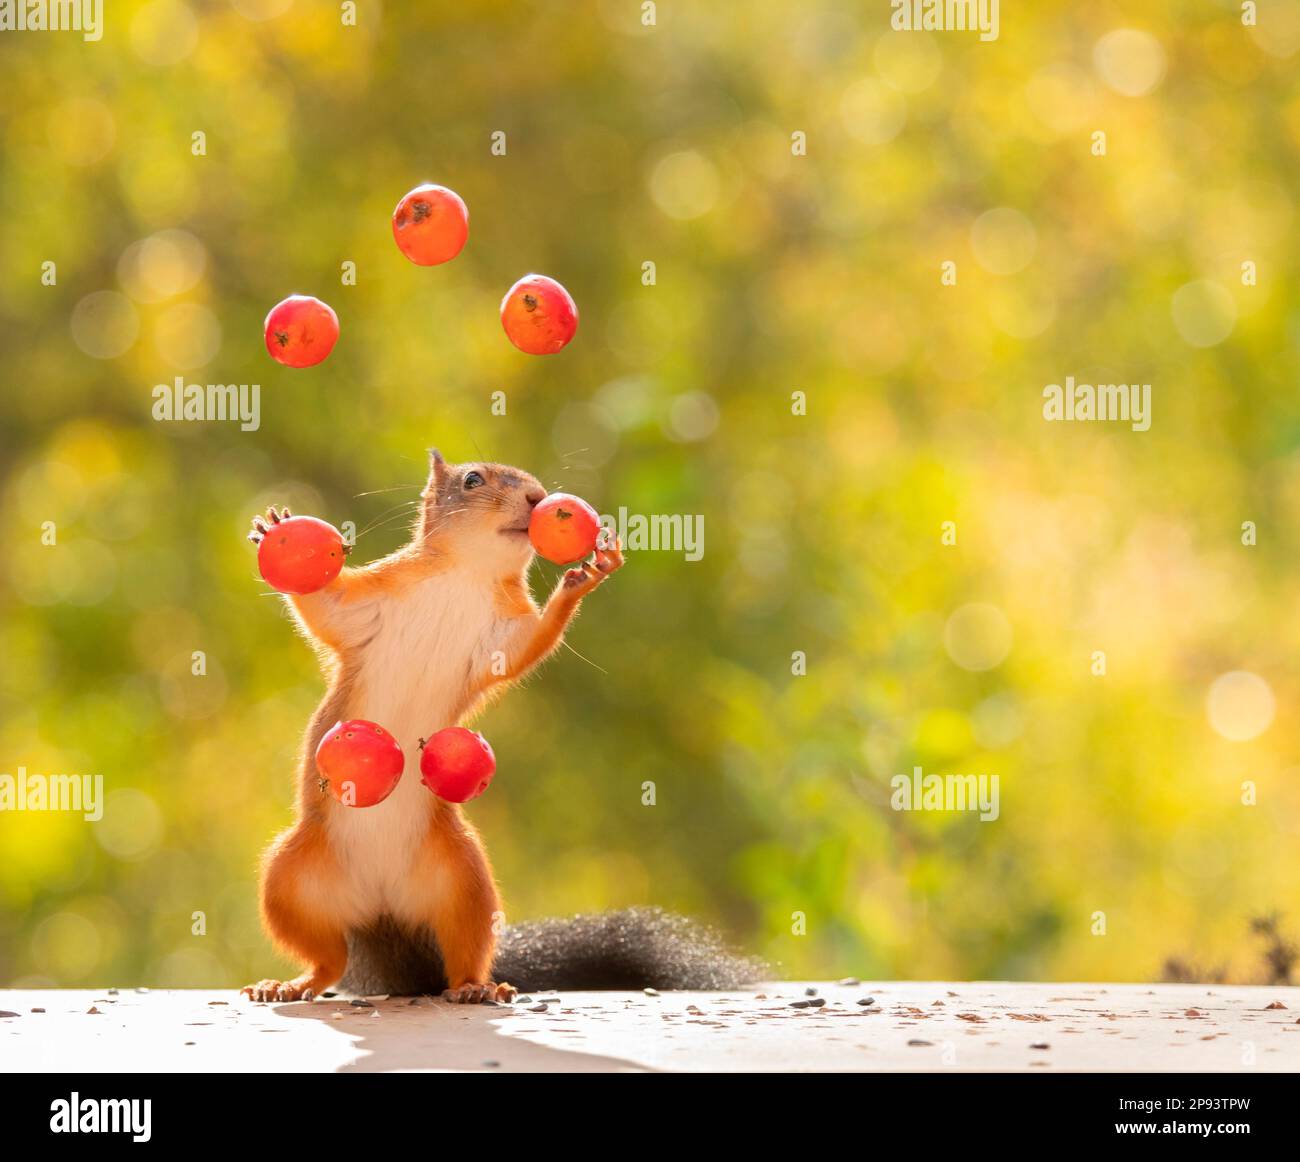 red squirrel juggling with apples Stock Photo